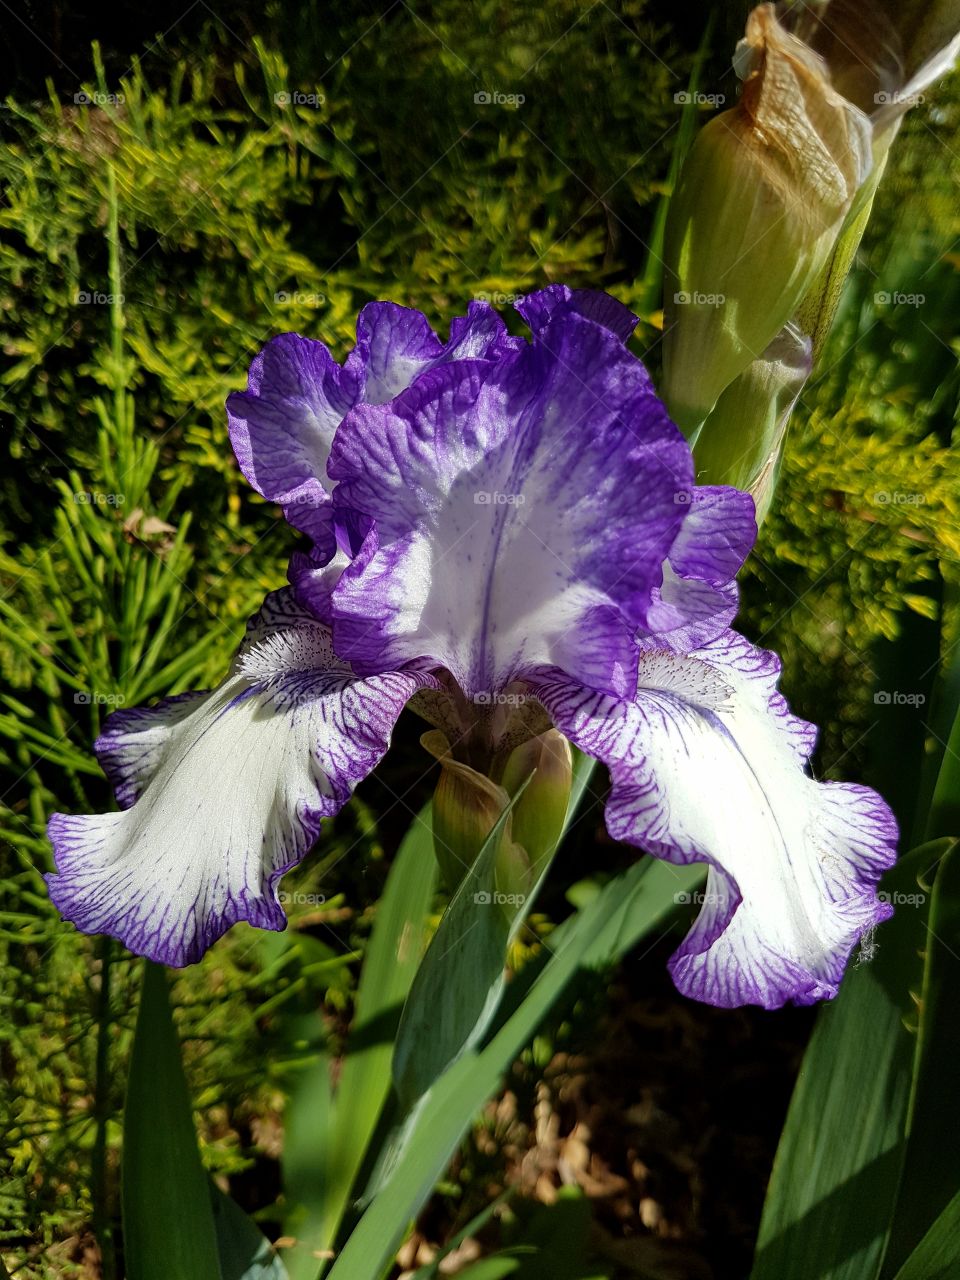 Blooming purple and white iris flower in a garden in spring